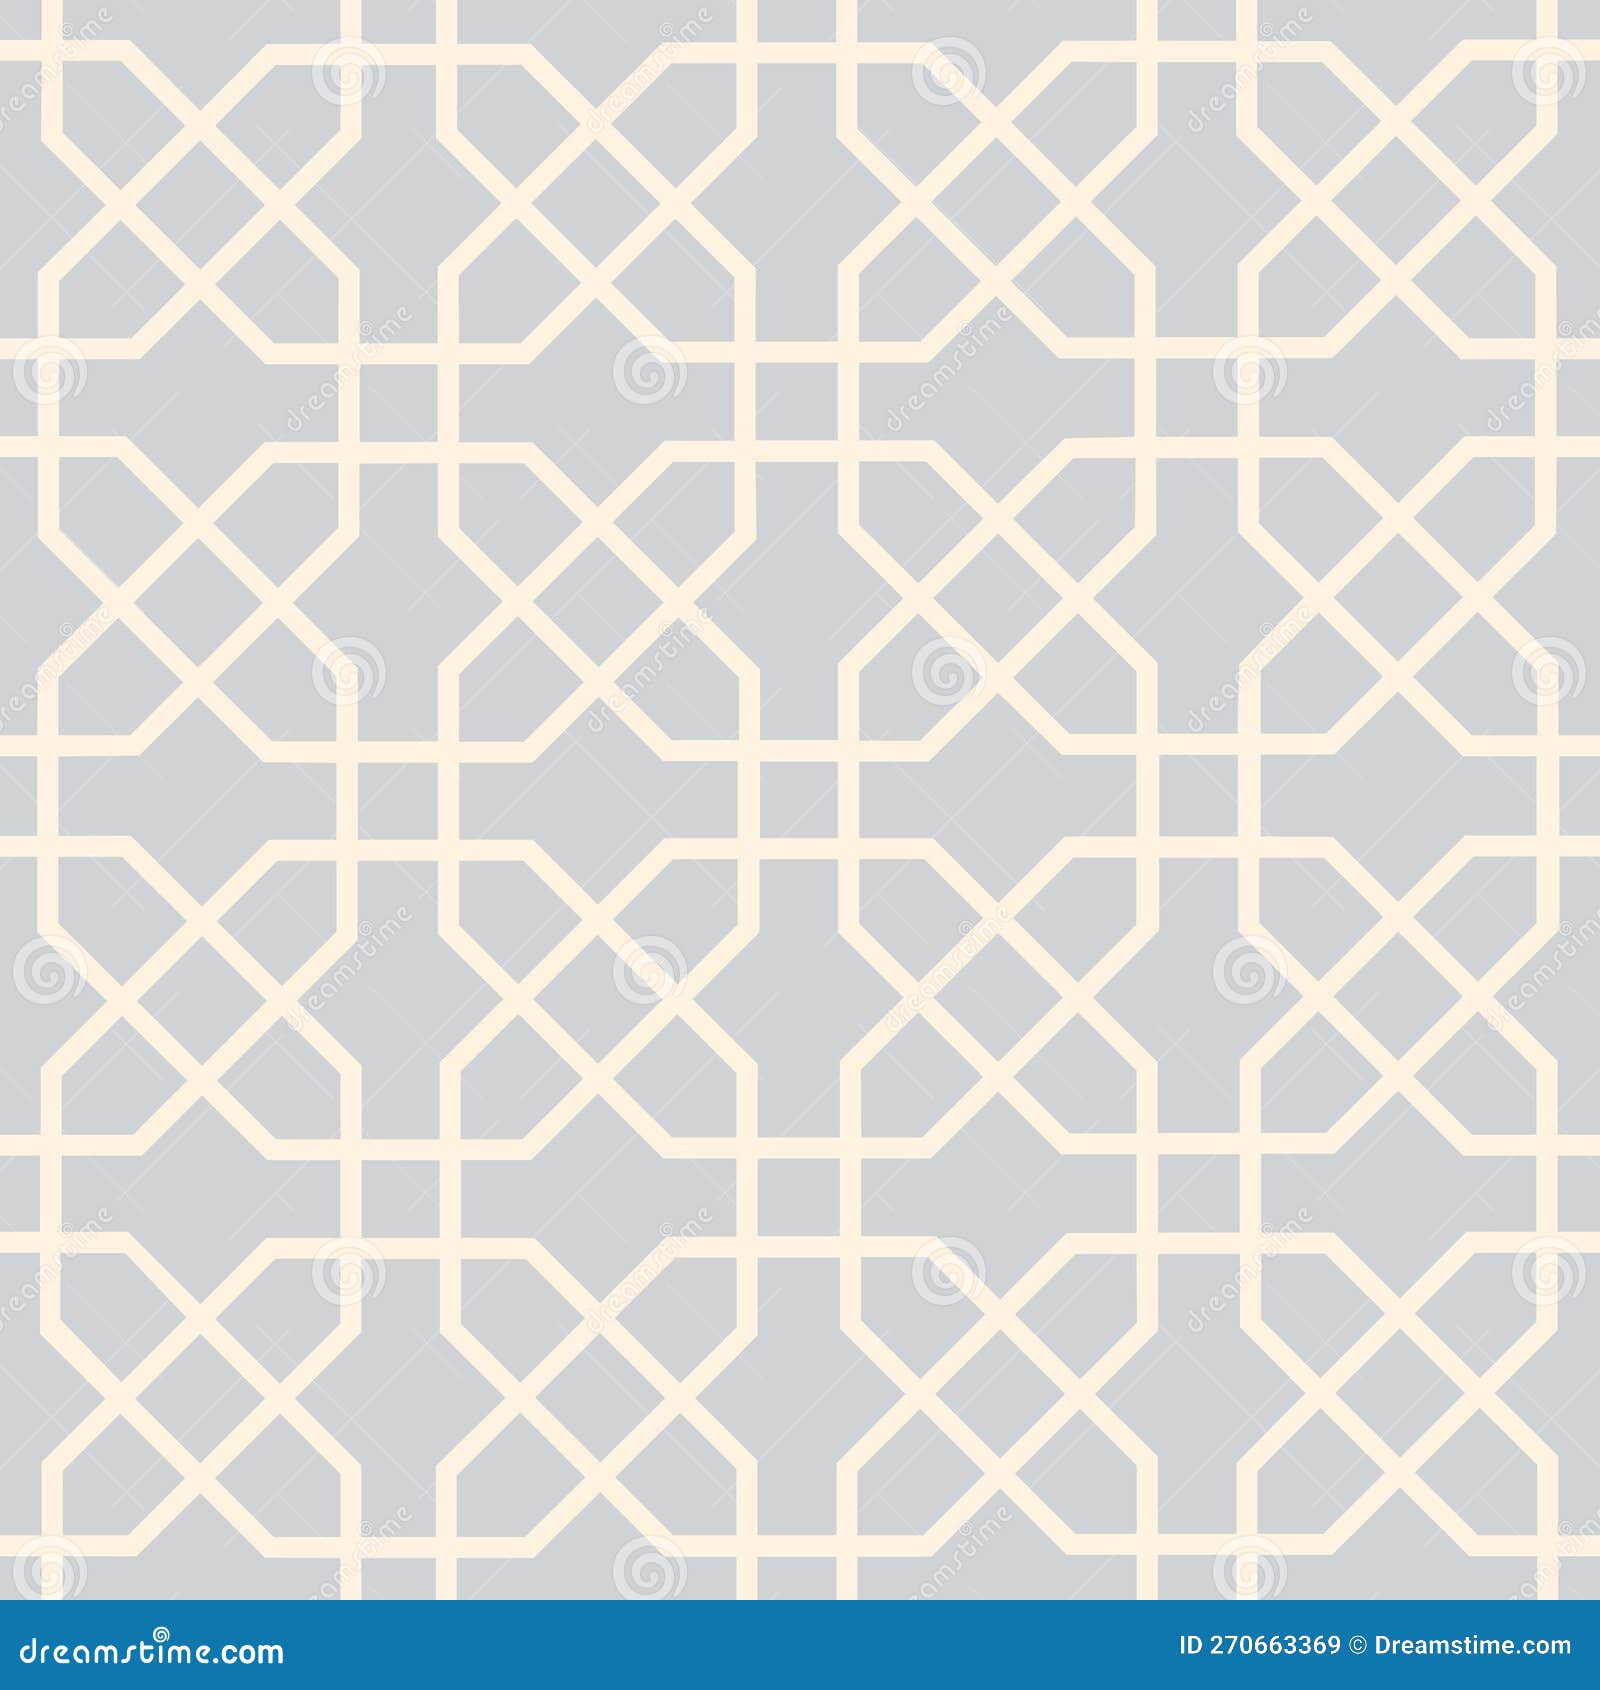 abstract geometric s and diagonal lines seamless pattern. mosaic tile ornament texure with stylish asian motif